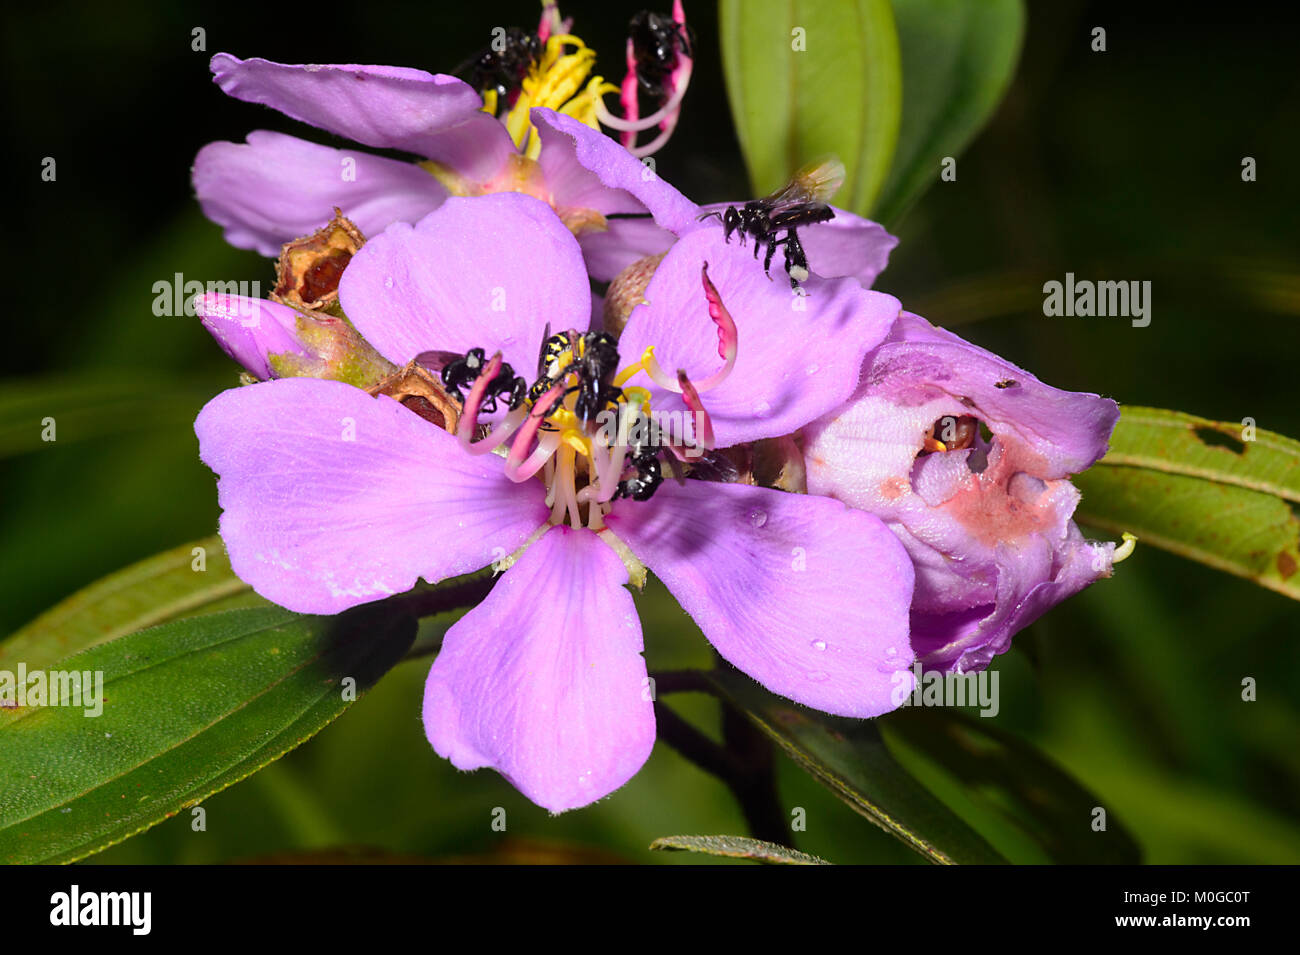 Stingless Bees pollinating a purple flower, Danum Valley Conservation Area, Borneo, Sabah, Malaysia Stock Photo